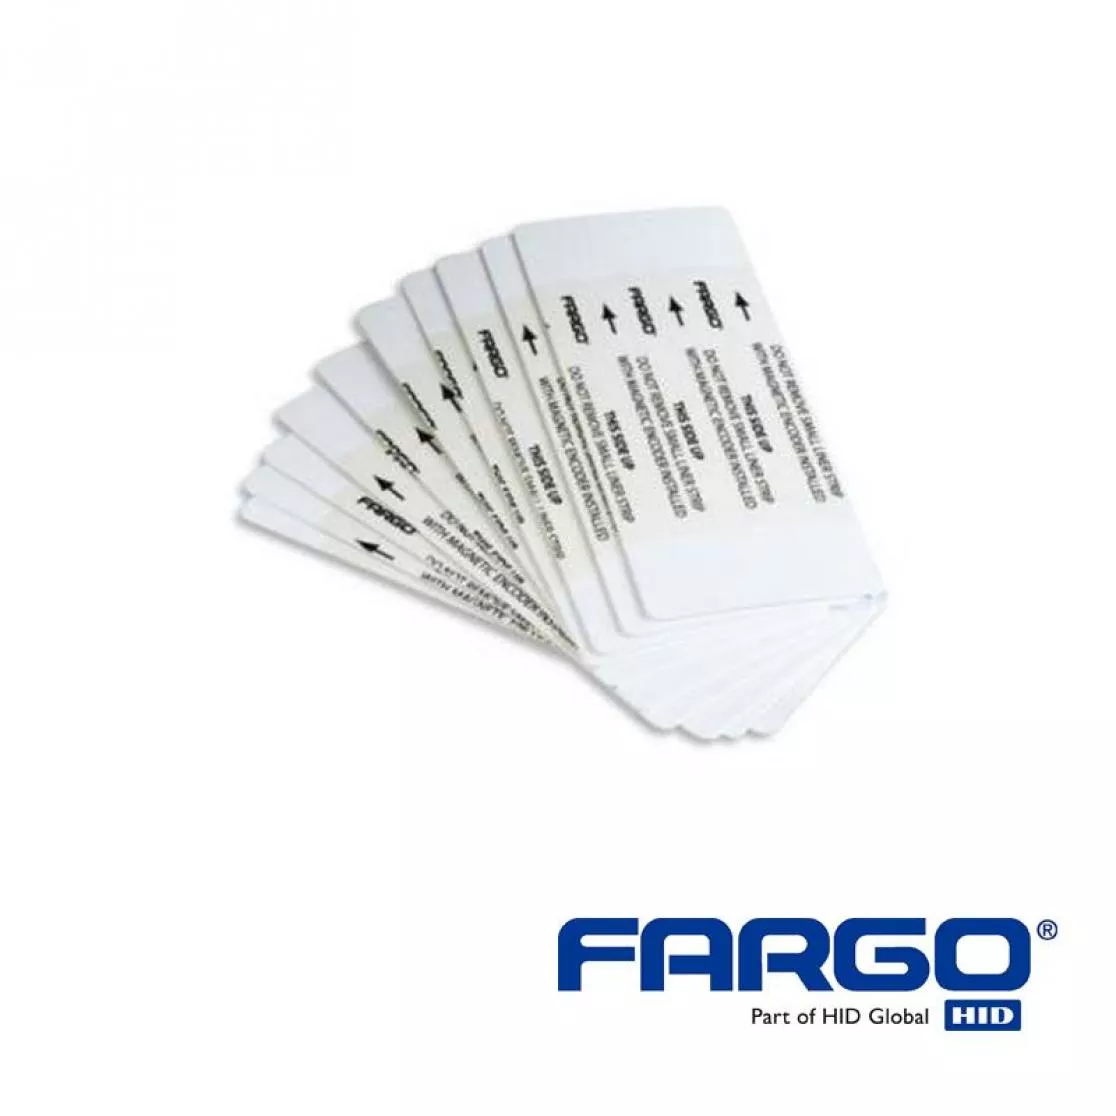 Cleaning card double-sided for hid fargo HDP5000 card printer